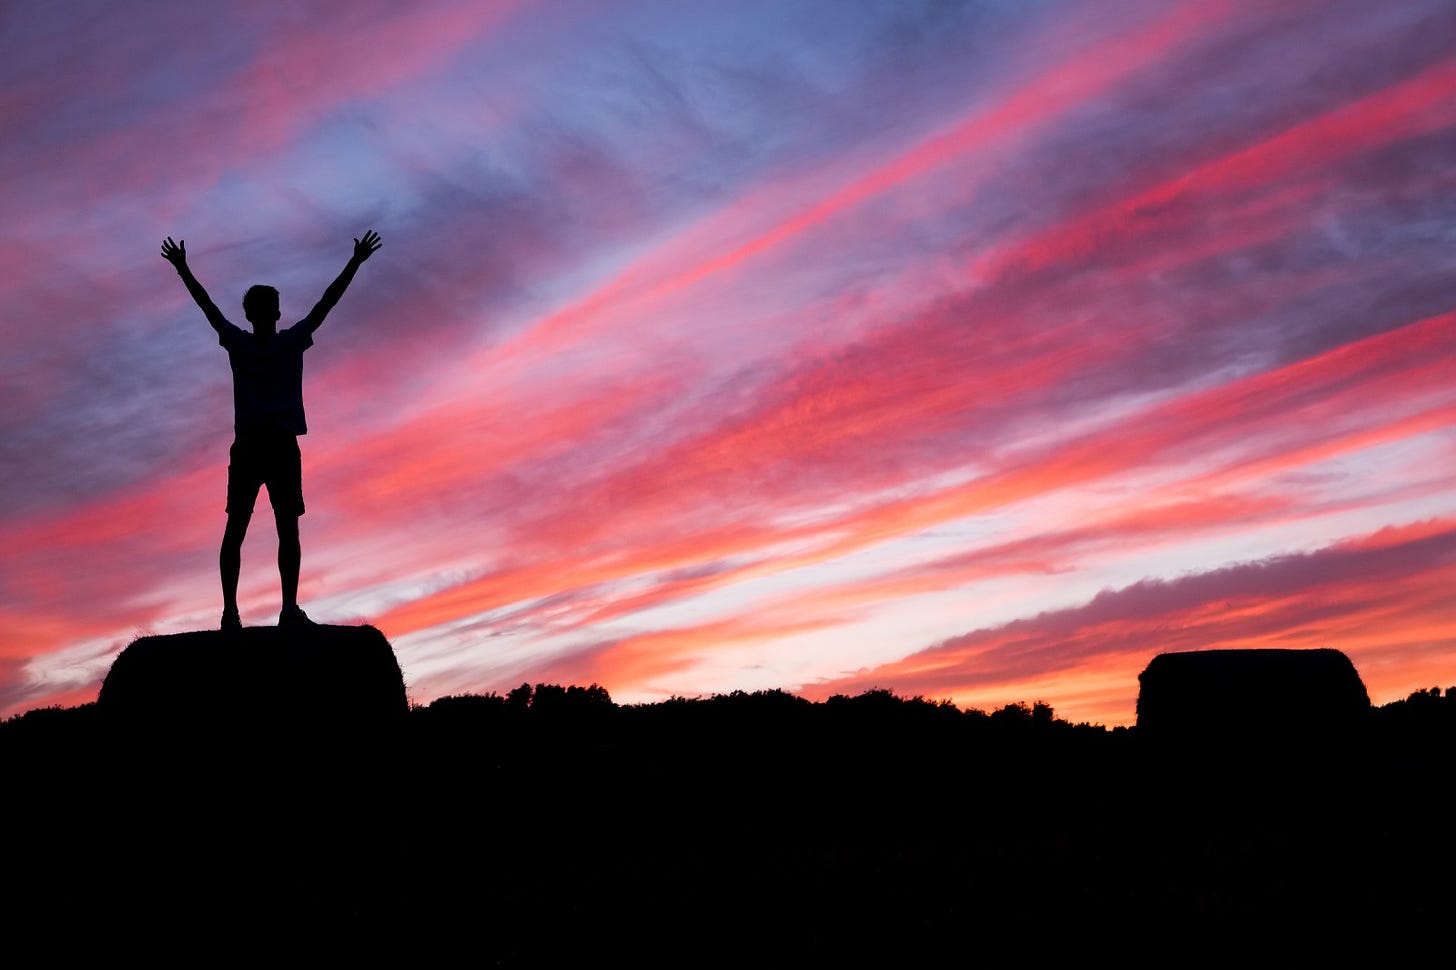 A man raises his arms in triumph while standing on a large rock and looking at a colorful sunset